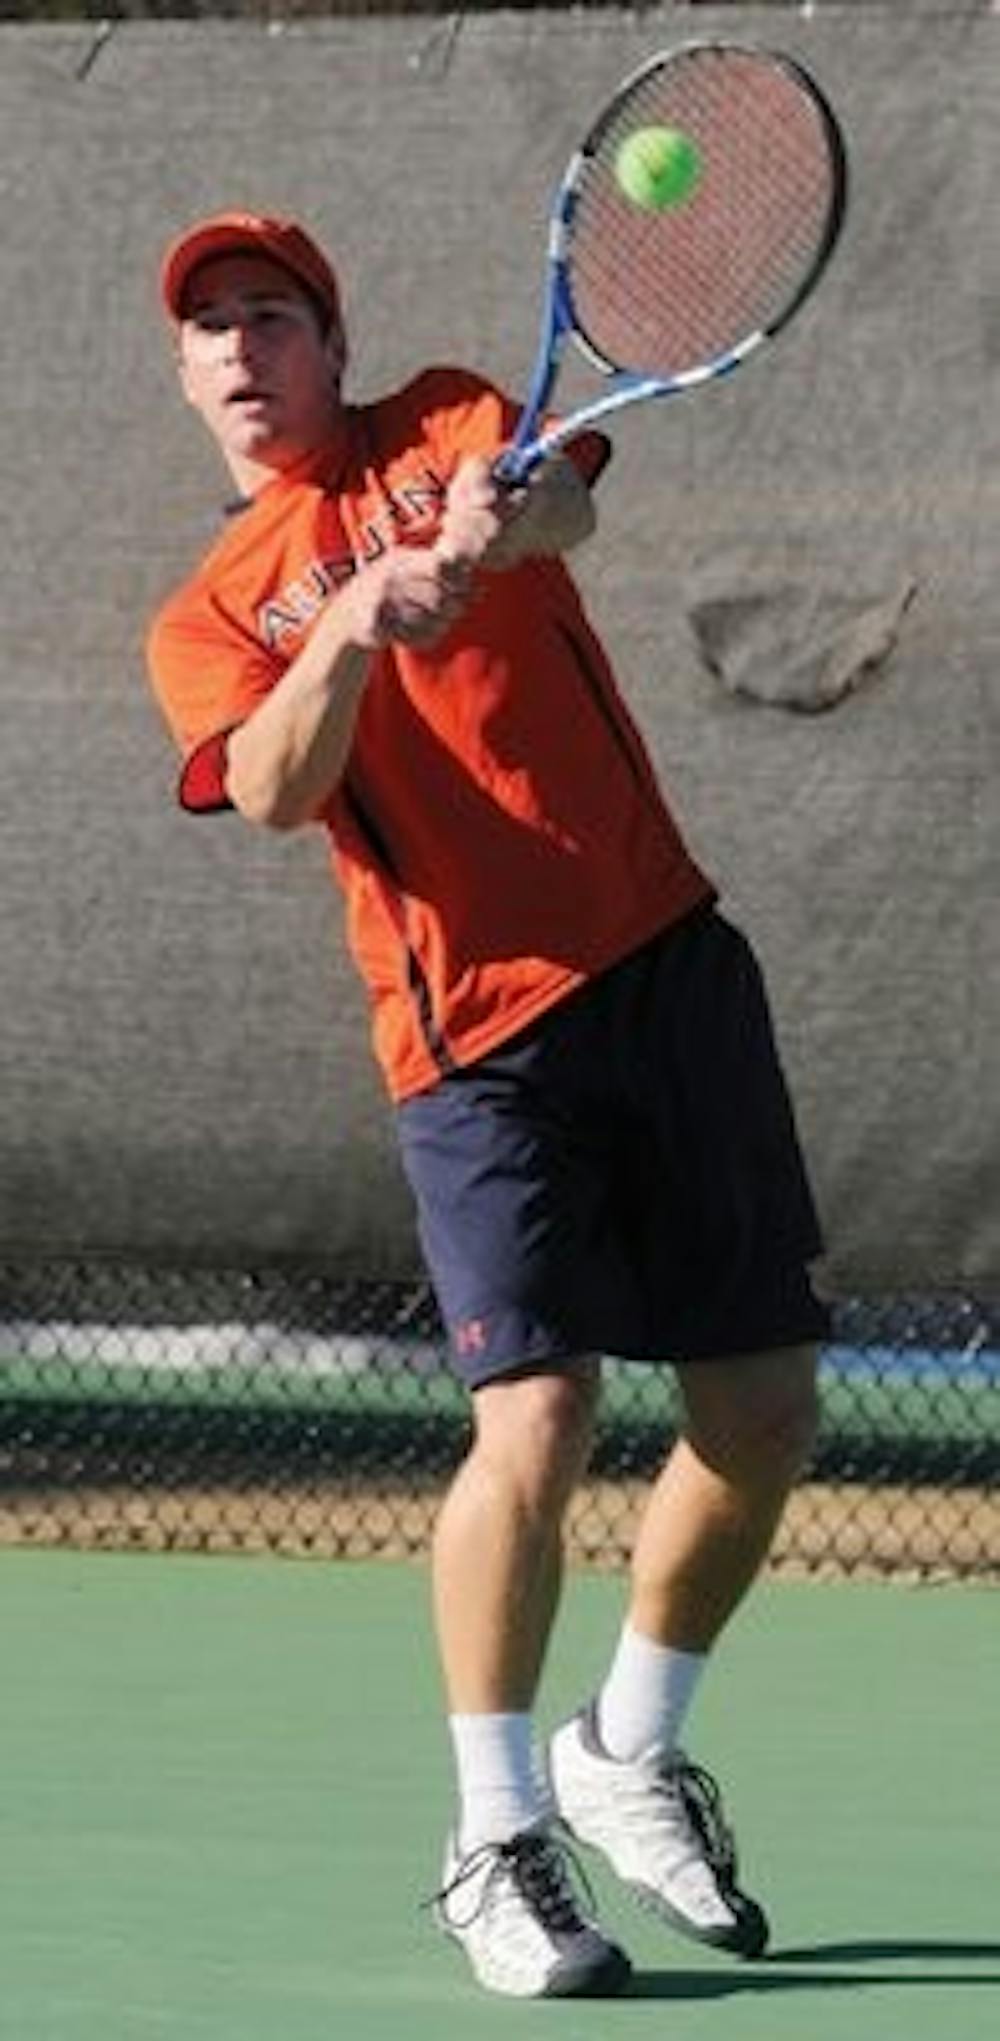 Wardell ended this year with a 10-6 singles record. (Todd Van Emst / Media Relations)